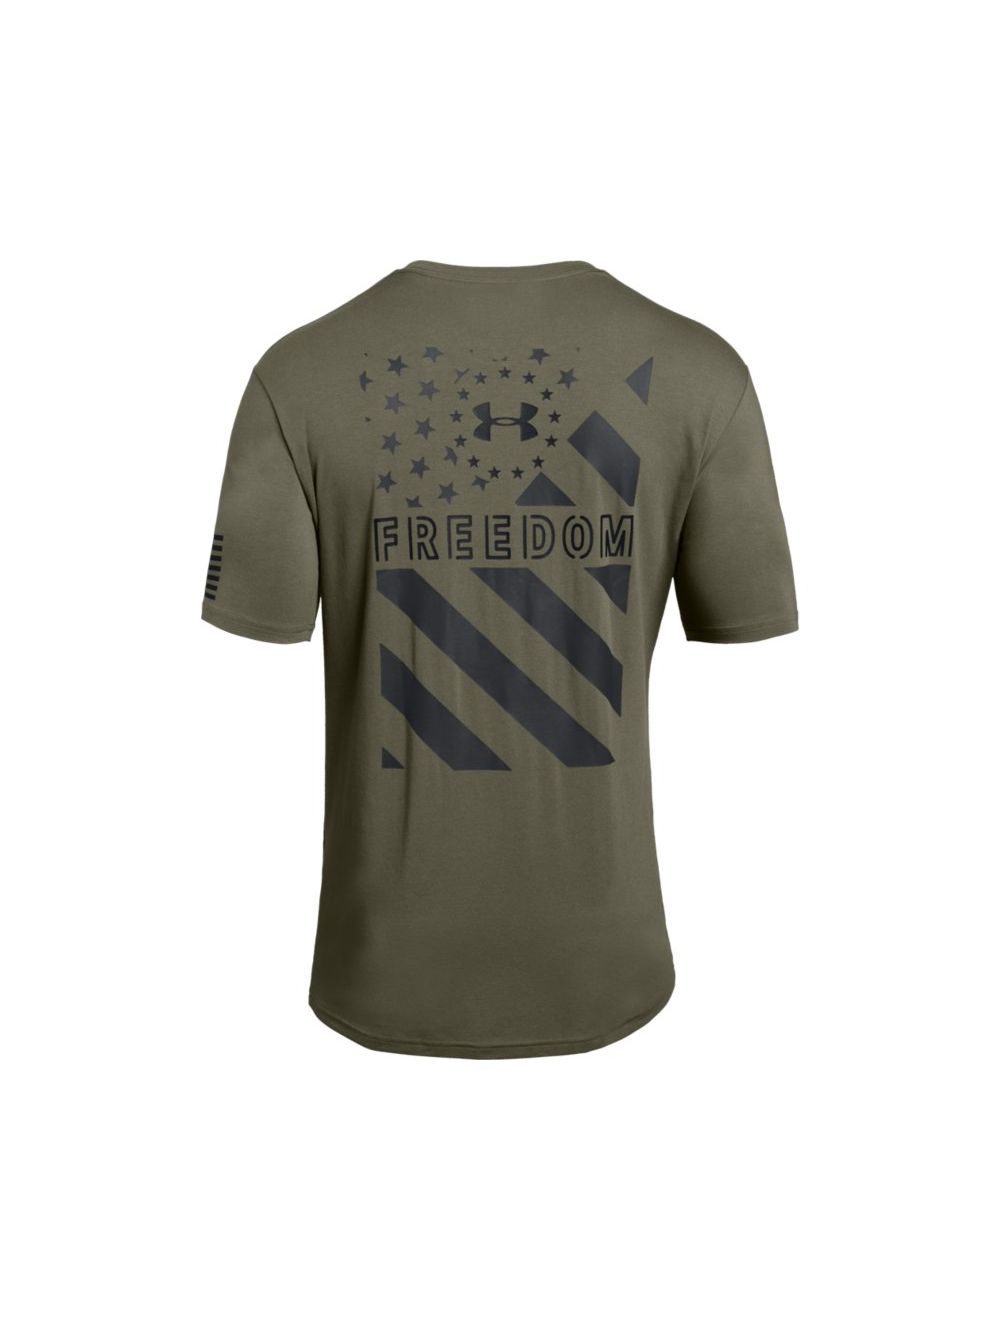 Under Armour Men's Tactical Freedom Express Flag Graphic T-Shirt